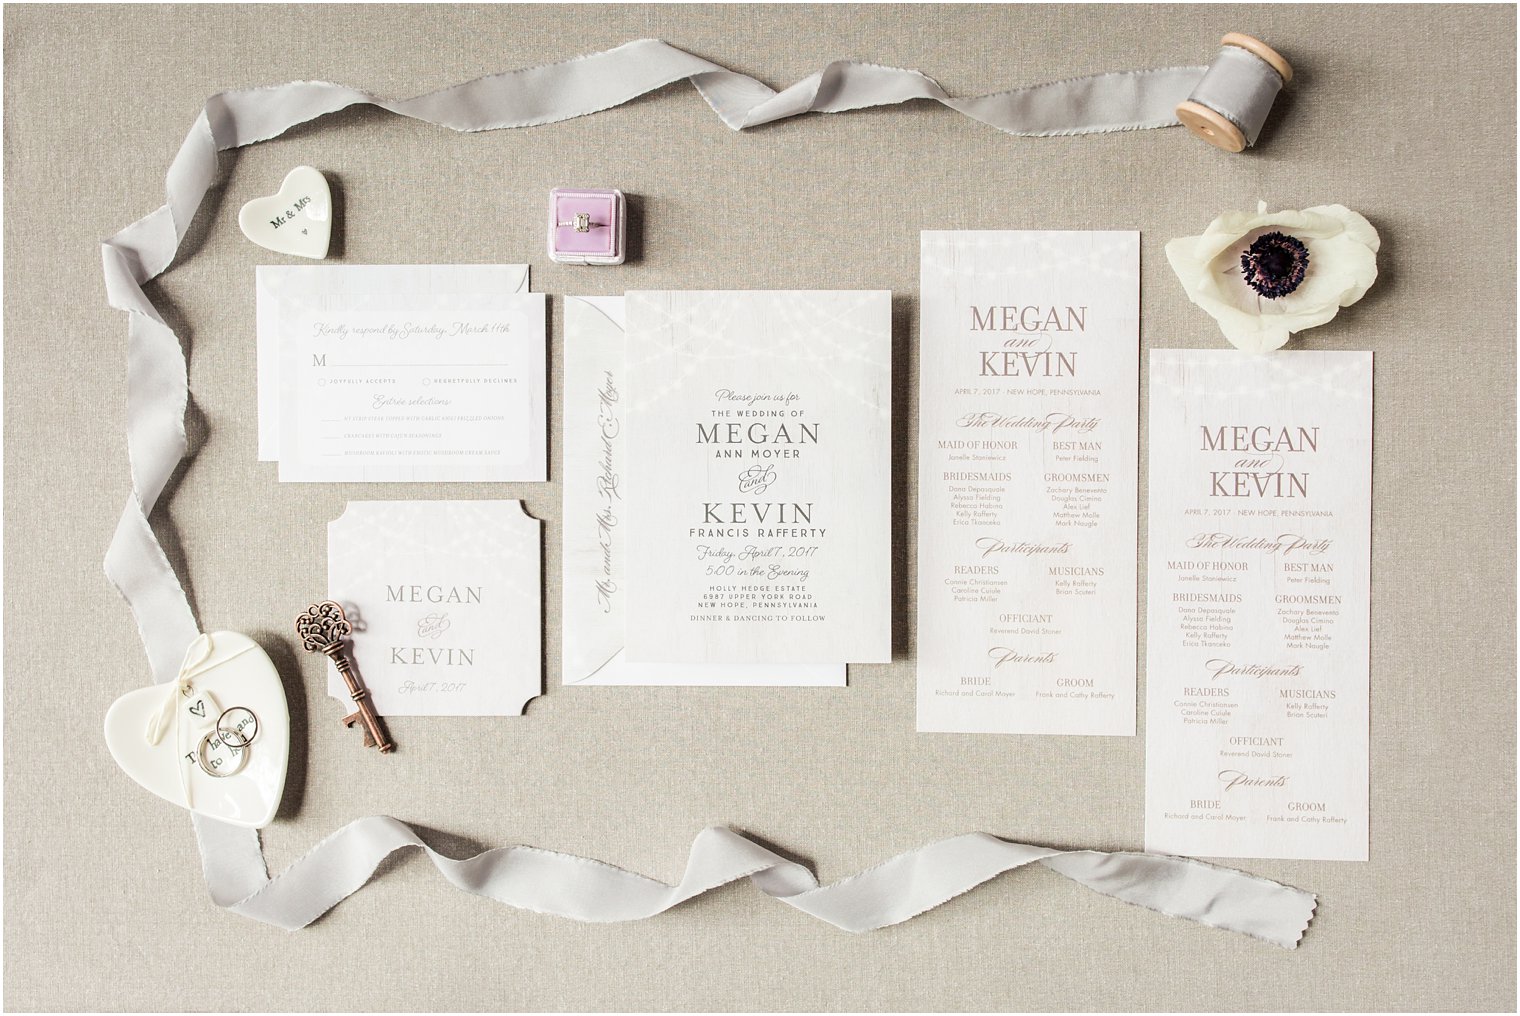 Full invitation suite with ribbon and floral elements